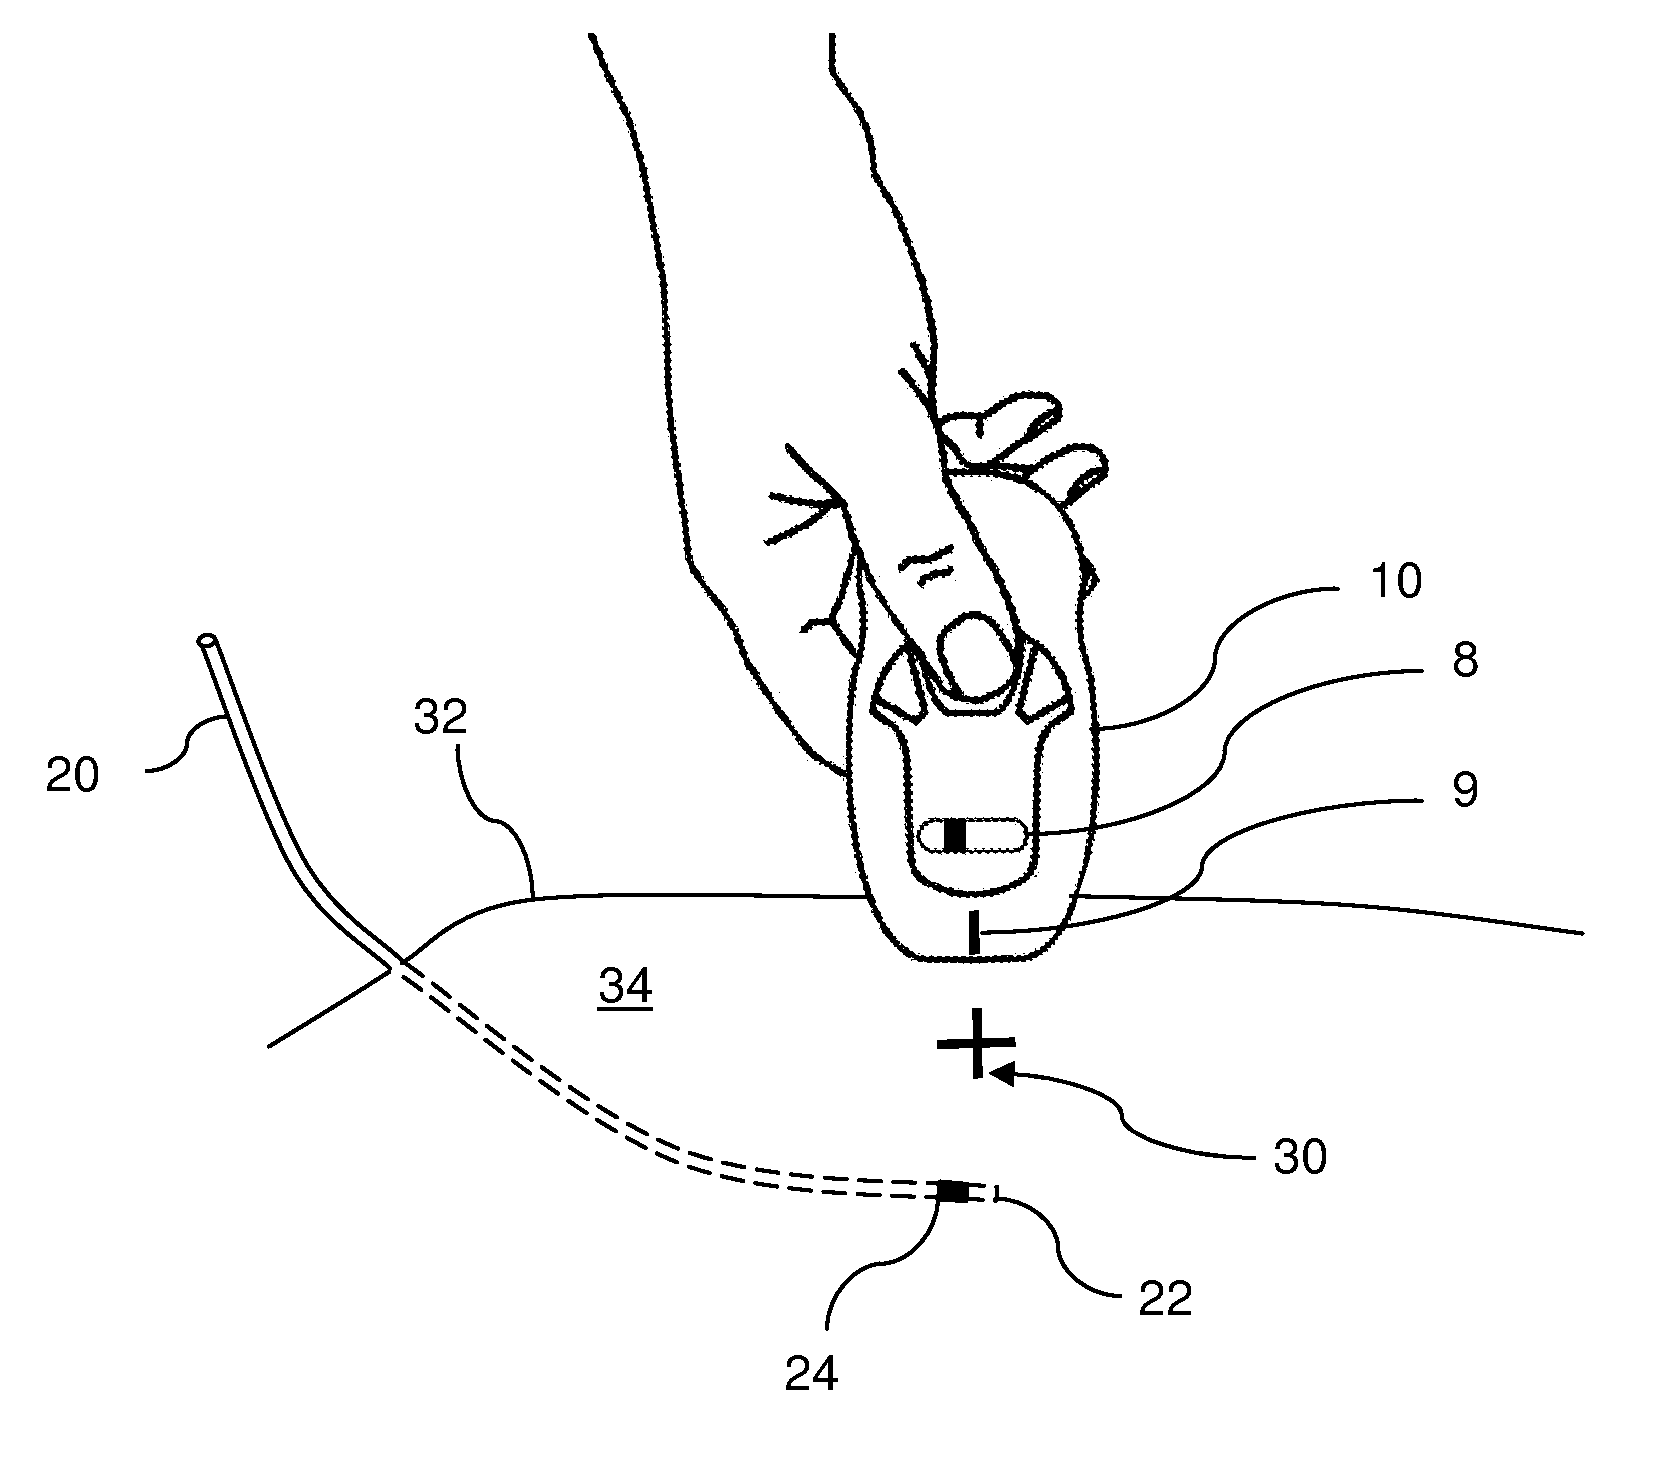 System for optically detecting position of an indwelling catheter